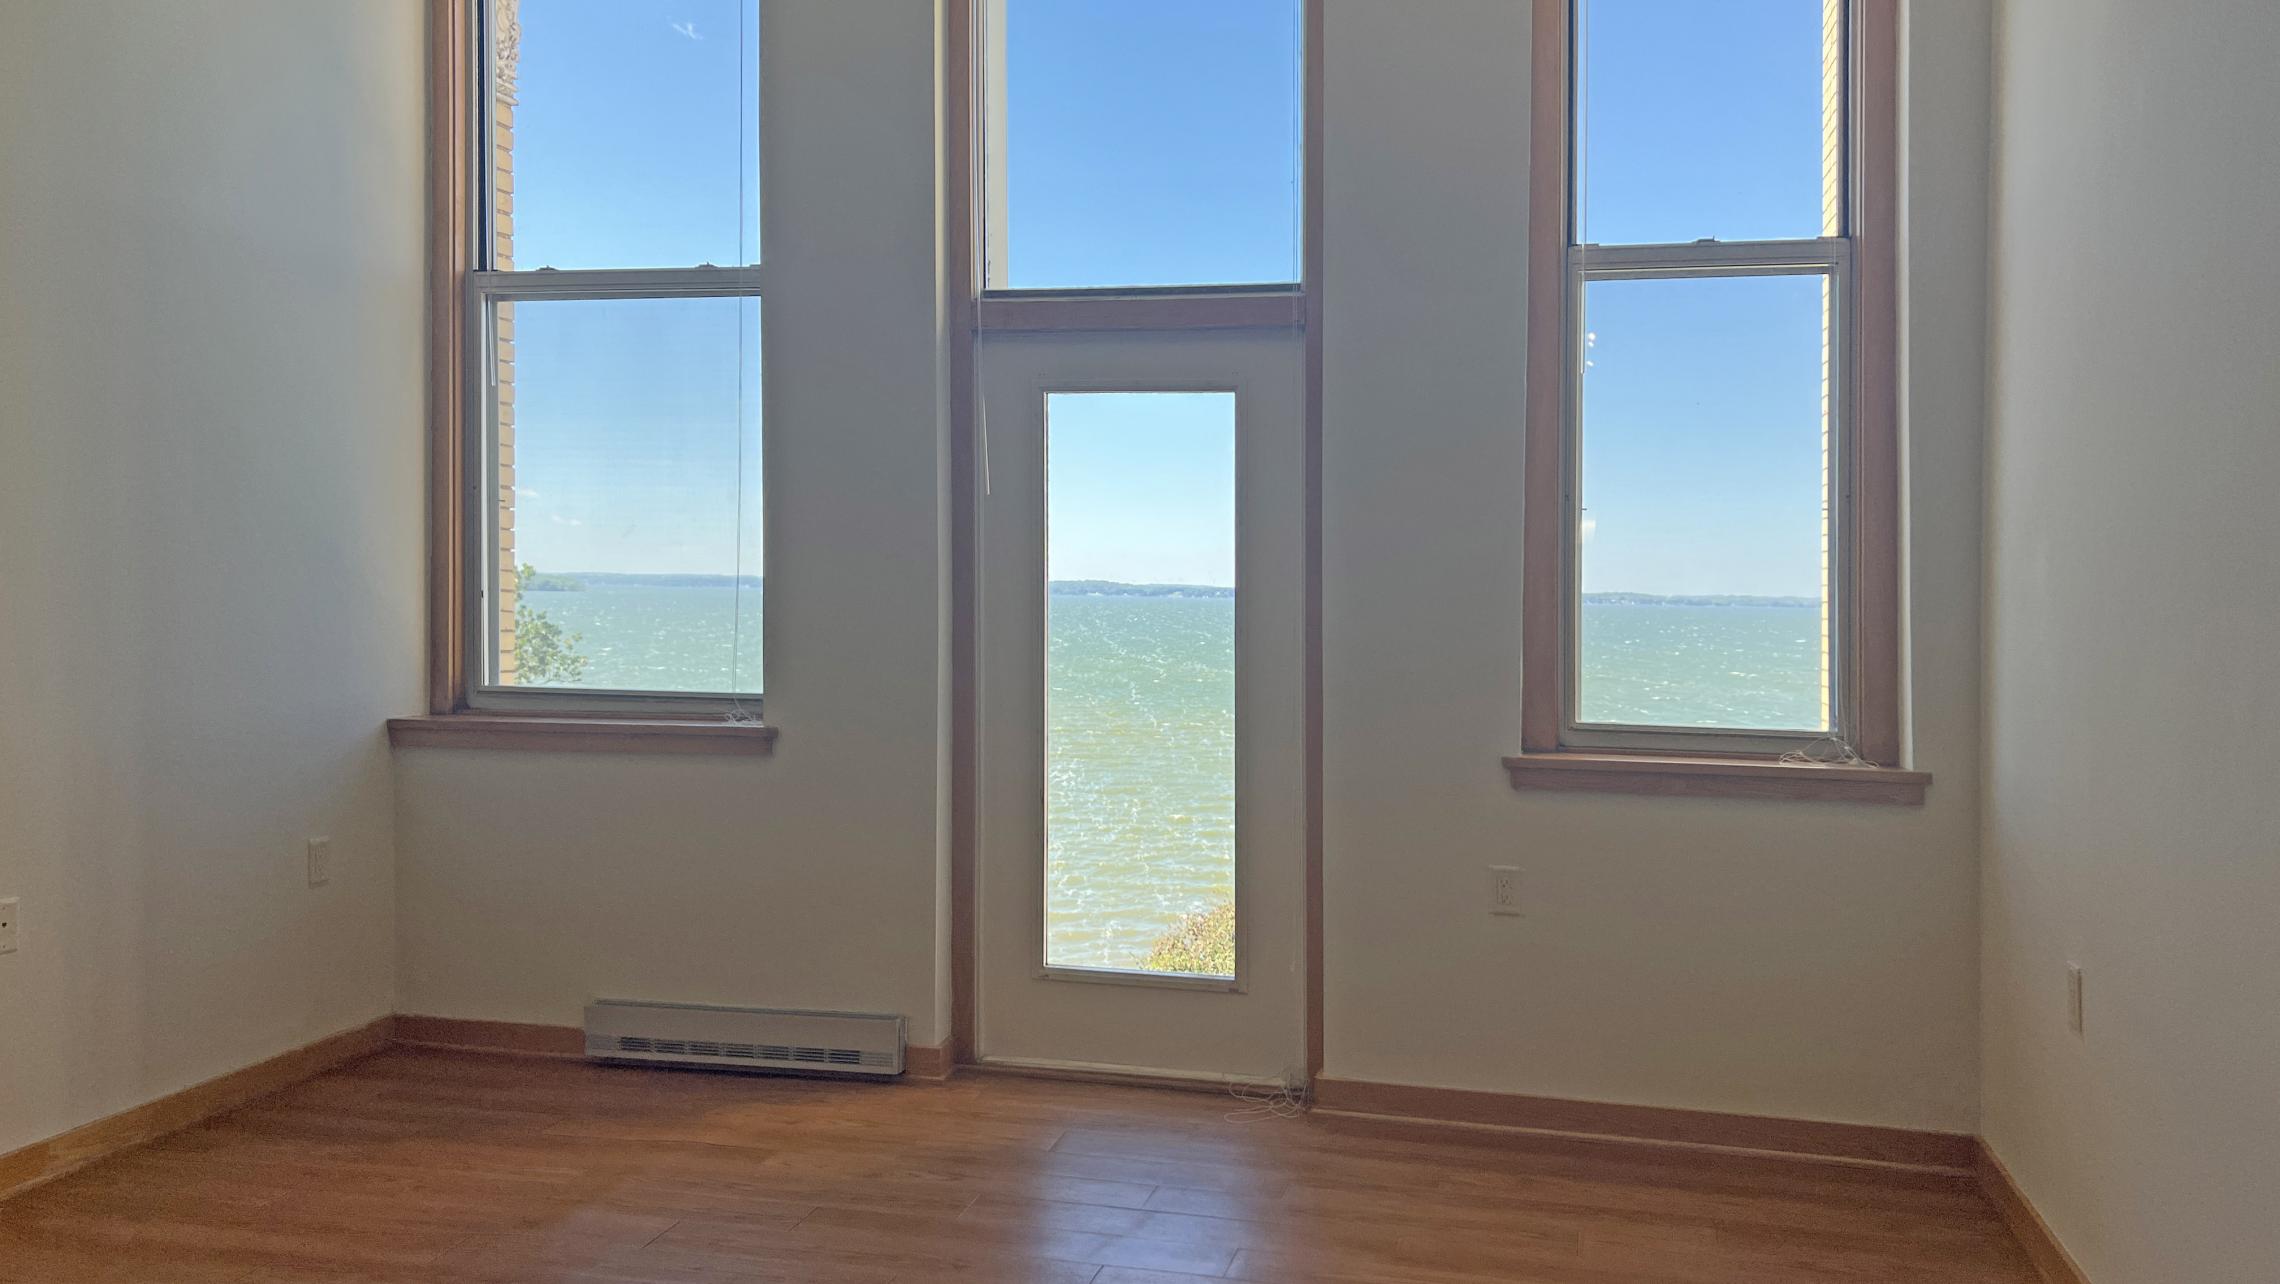 Lincoln-School-Apartment-402-One-Bedroom-Lake-Views-Downtown-Madison-Unique-Historic-Design-Exposed-Brick-Modern-Upscale-Luxury-Isthmus-Cat-Dog